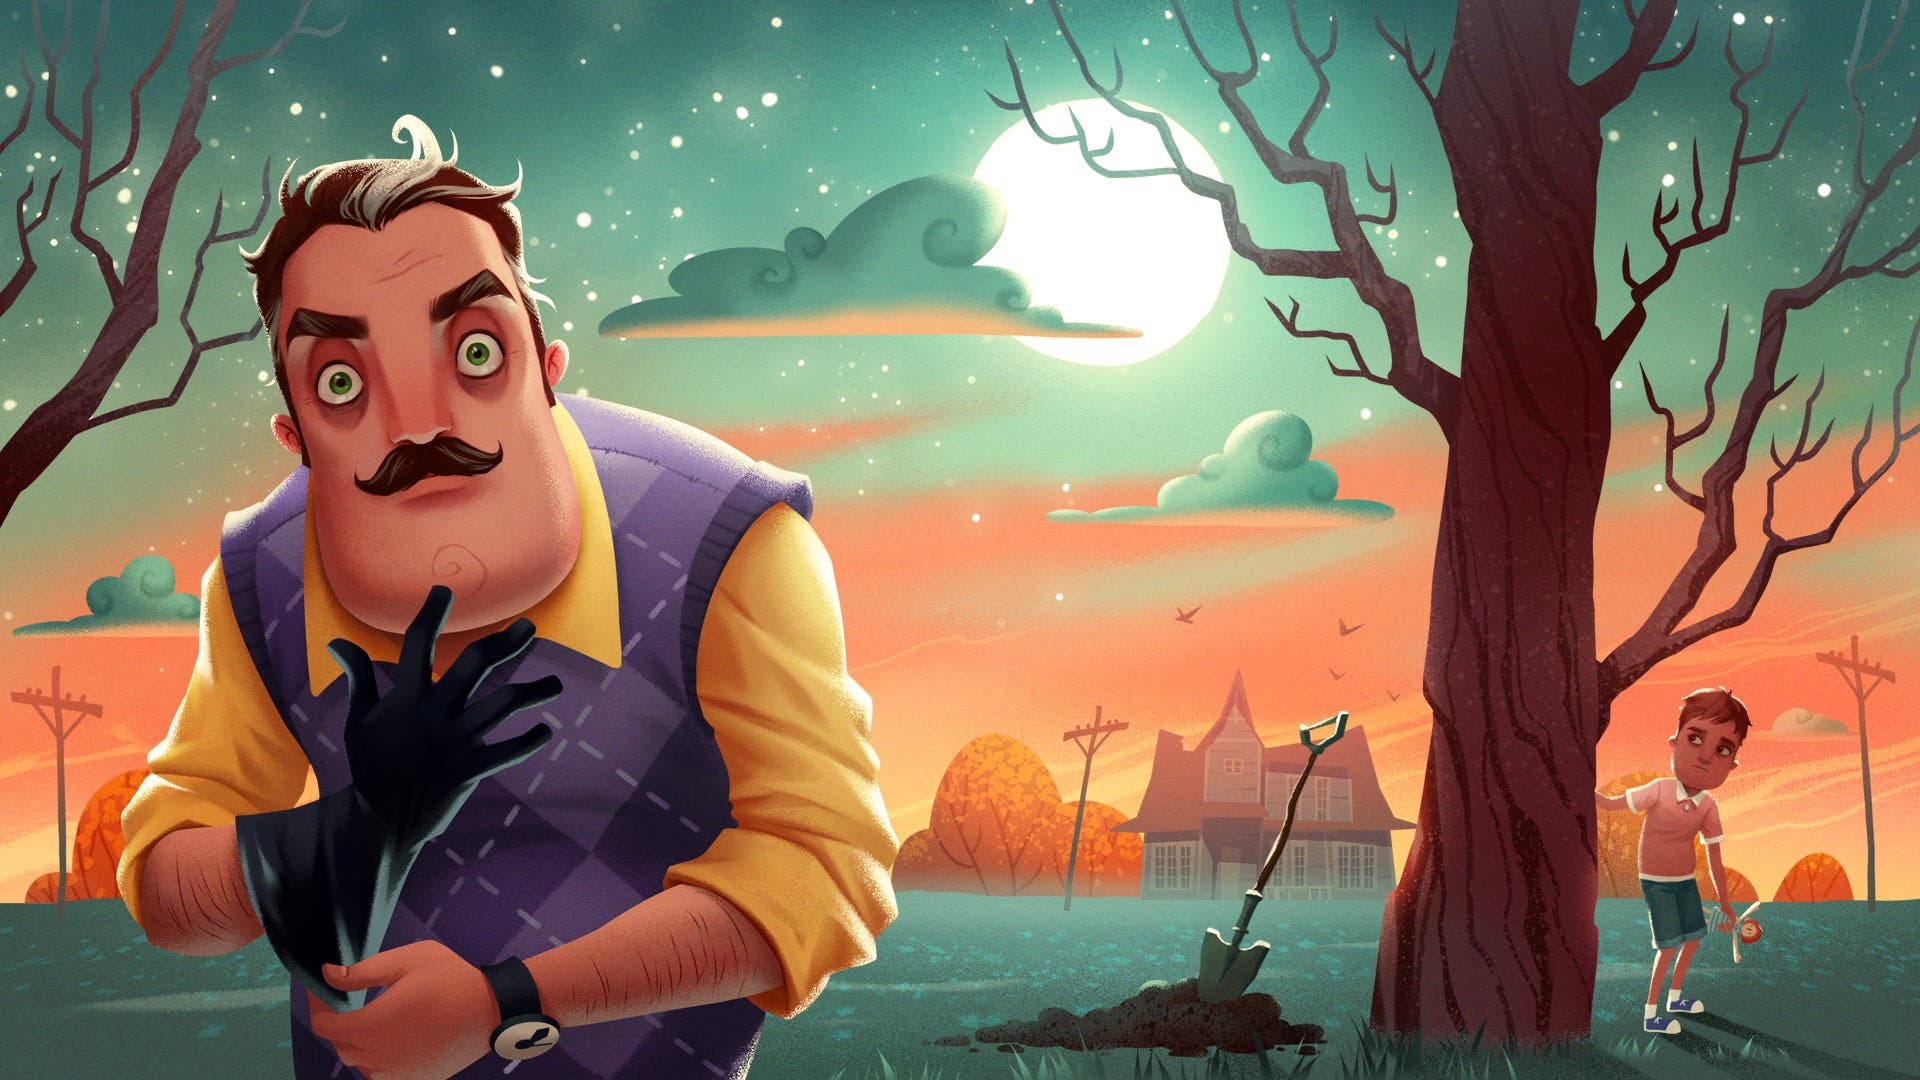 download free hello neighbor 2 switch